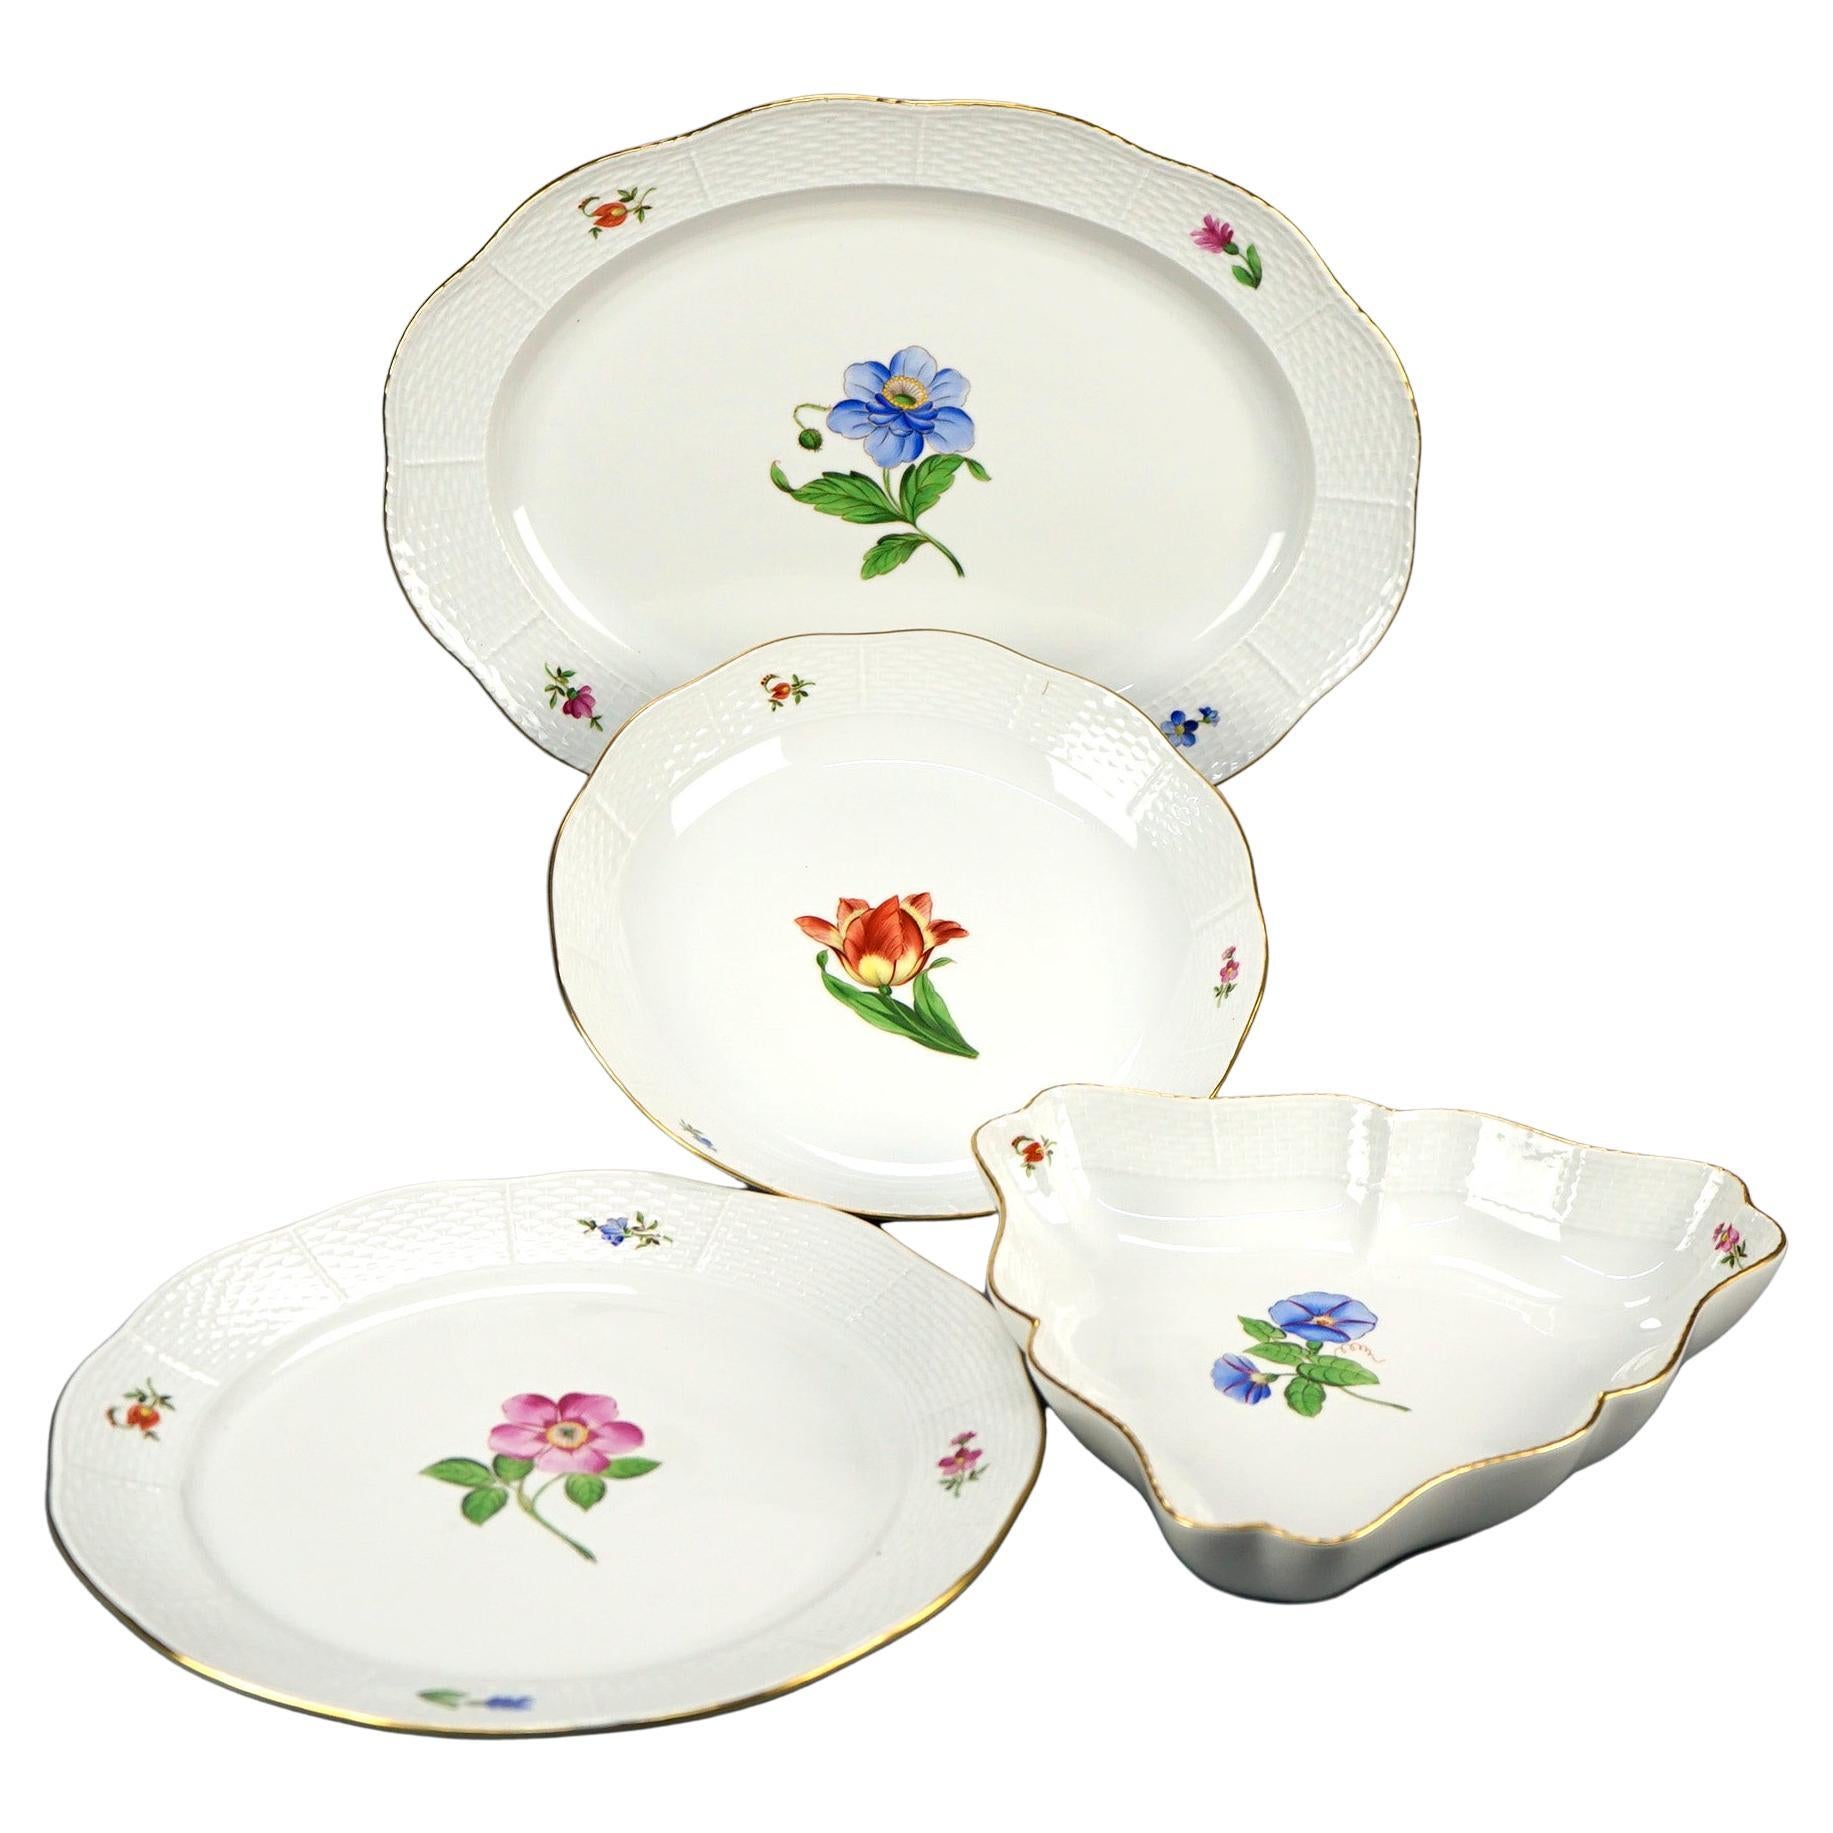 Four Floral Decorated Herend Porcelain Serving Pieces, 20th C